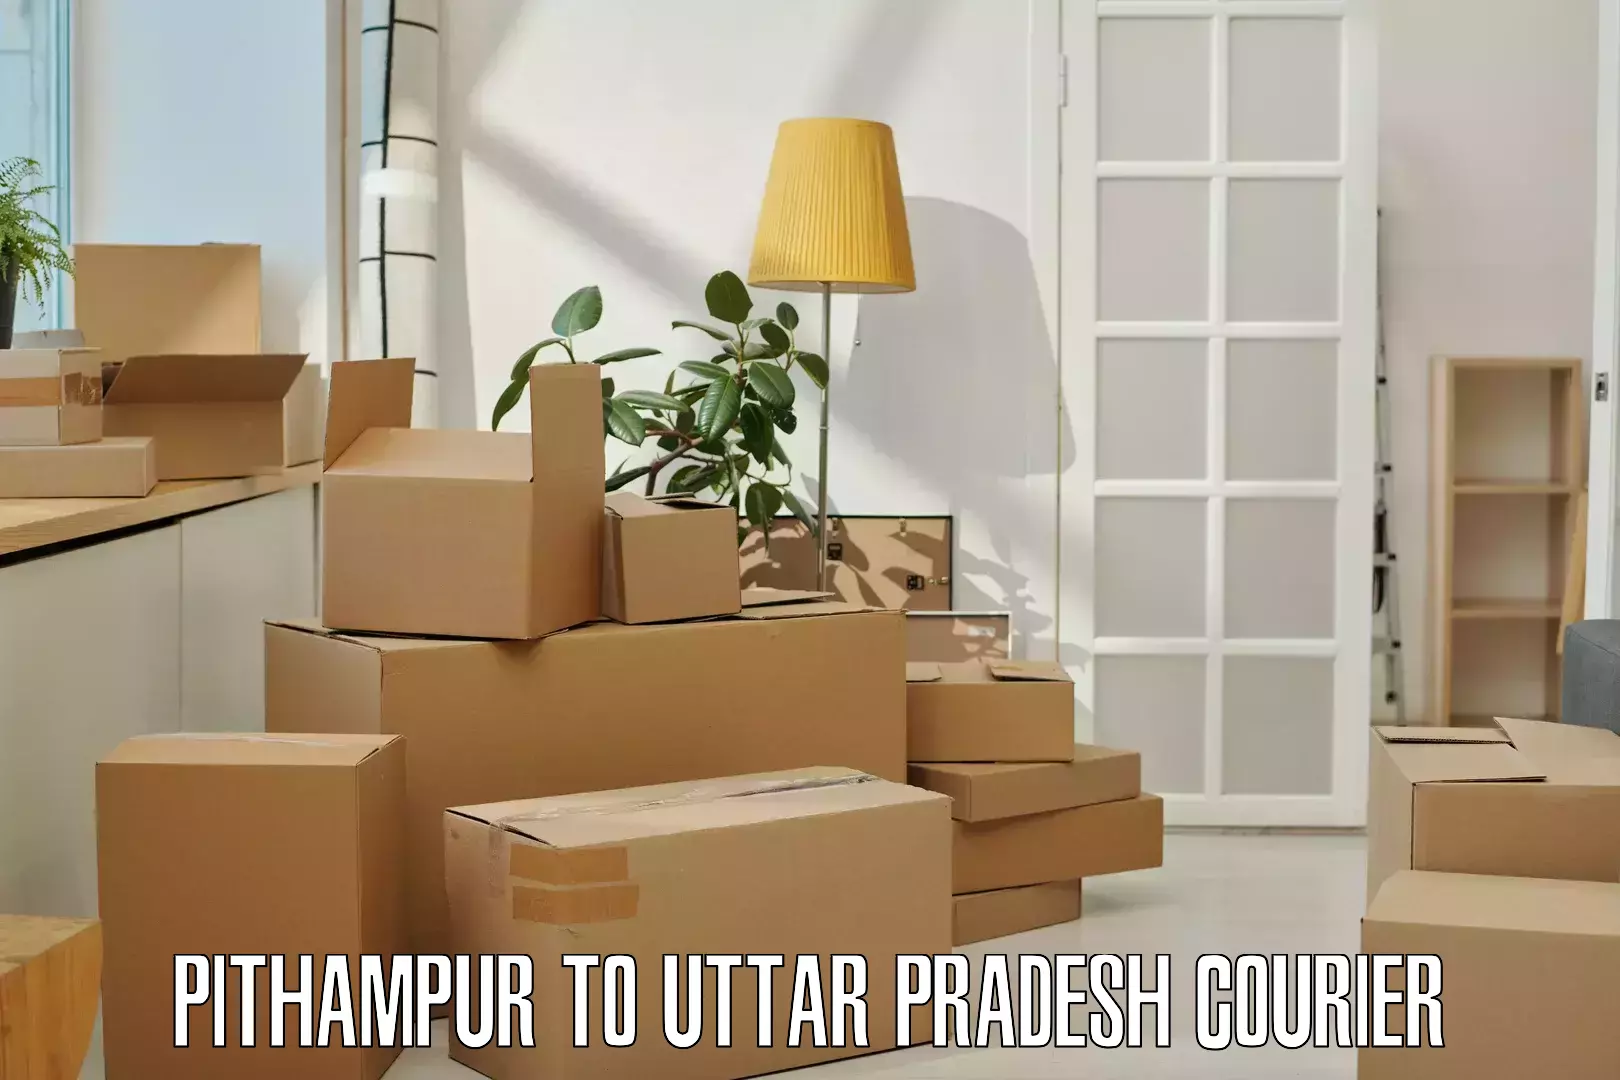 Fast delivery service Pithampur to Uttar Pradesh